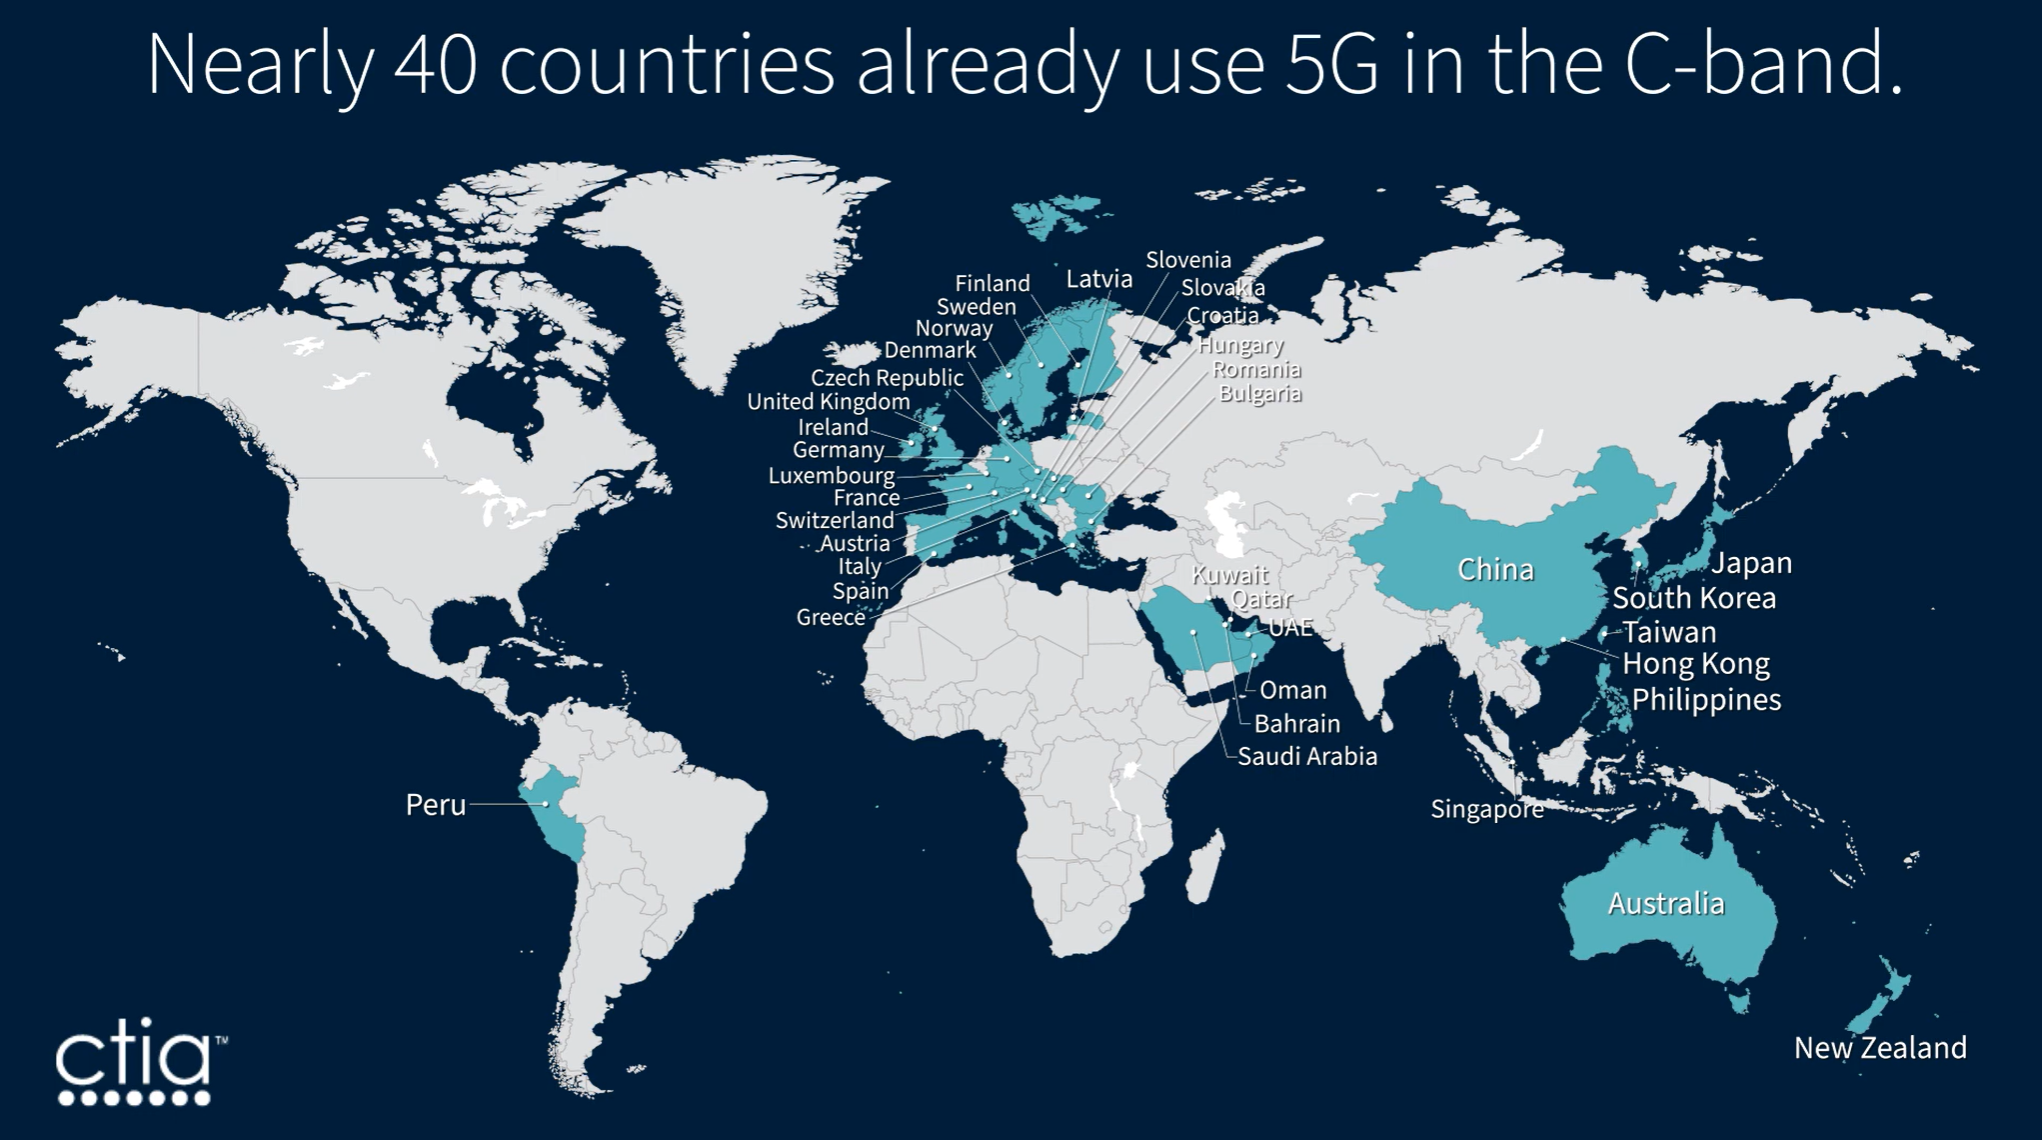 Airlines fly into 40 countries with same 5G the FAA warns could risk lives, industry group says